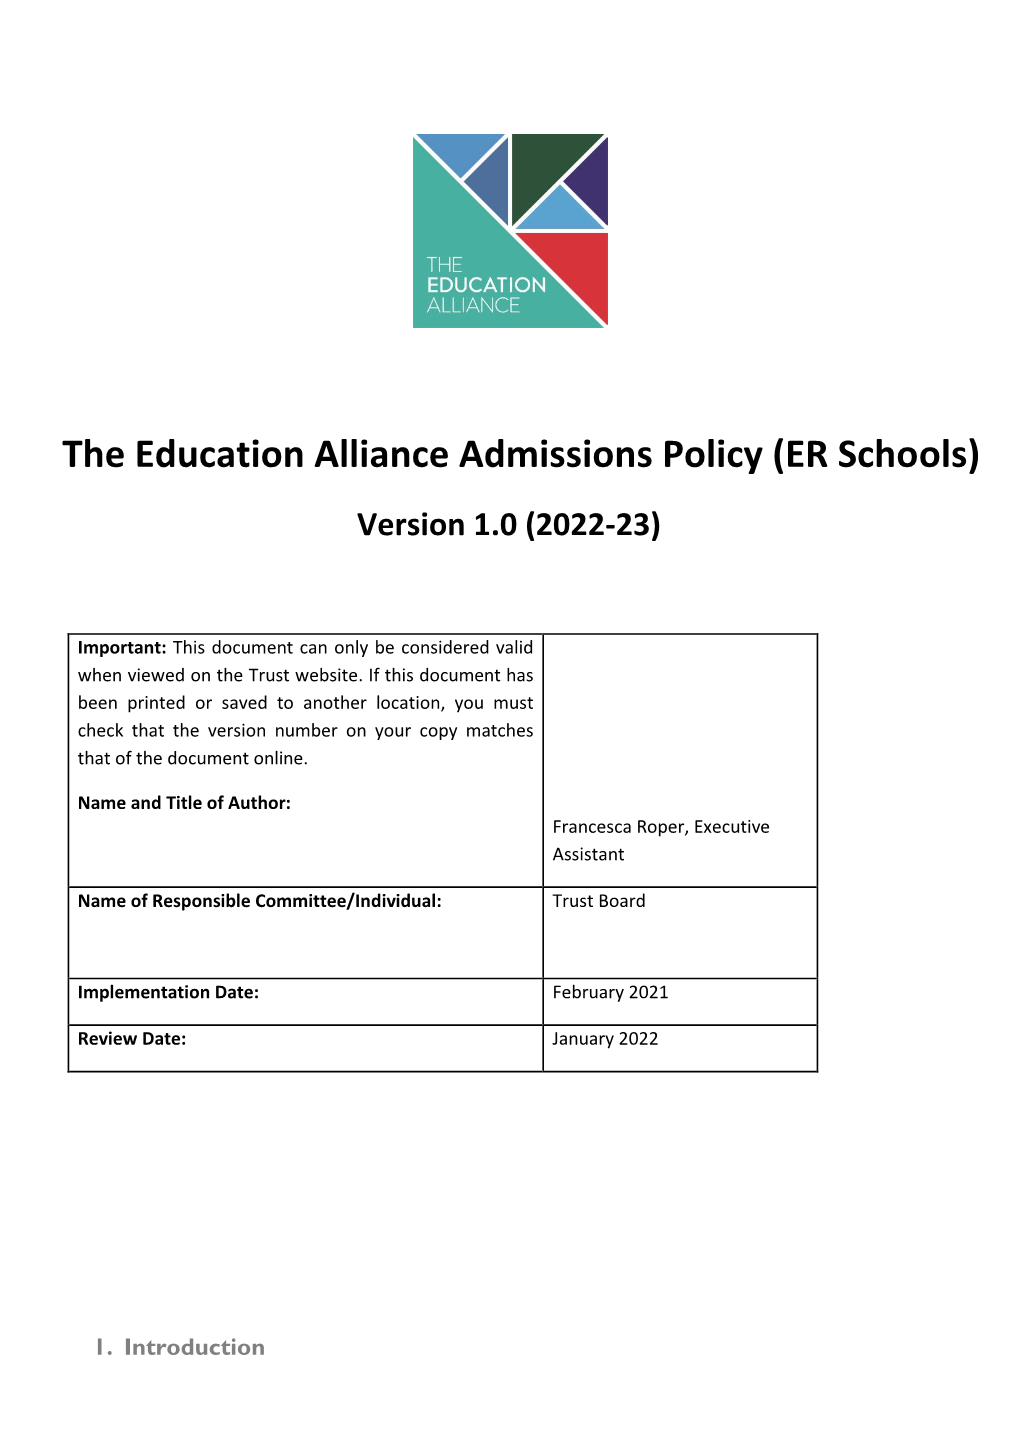 The Education Alliance Admissions Policy (ER Schools) Version 1.0 (2022-23)